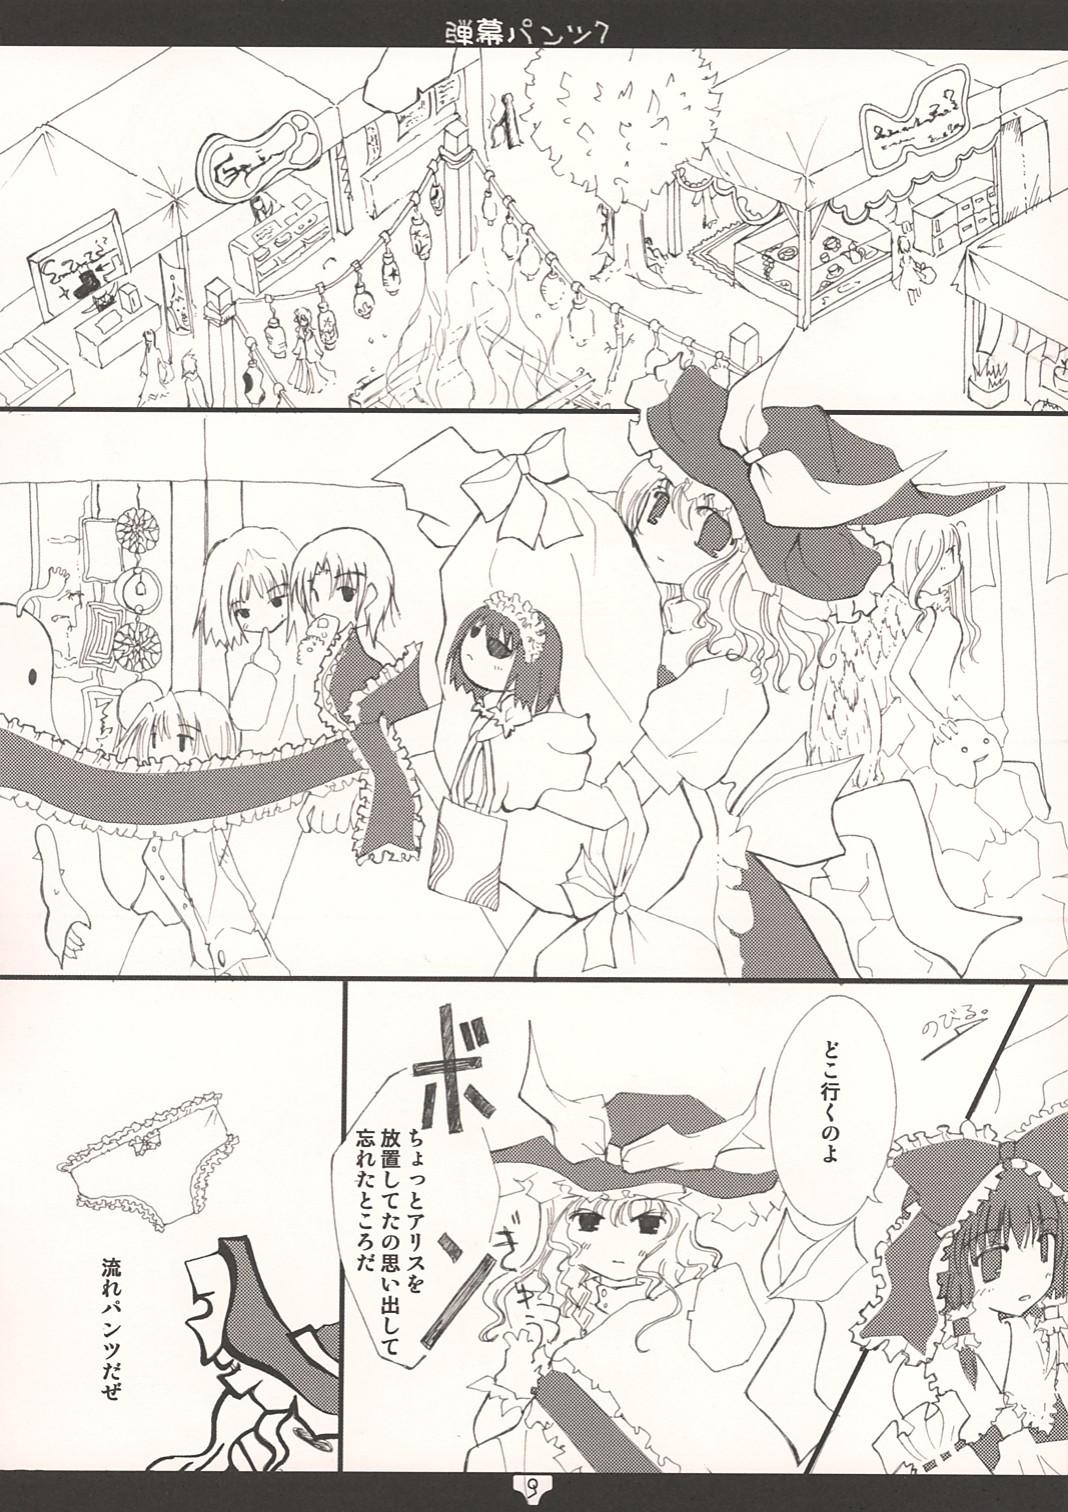 Celebrity 弾幕パンツ７ - Touhou project Gros Seins - Page 9